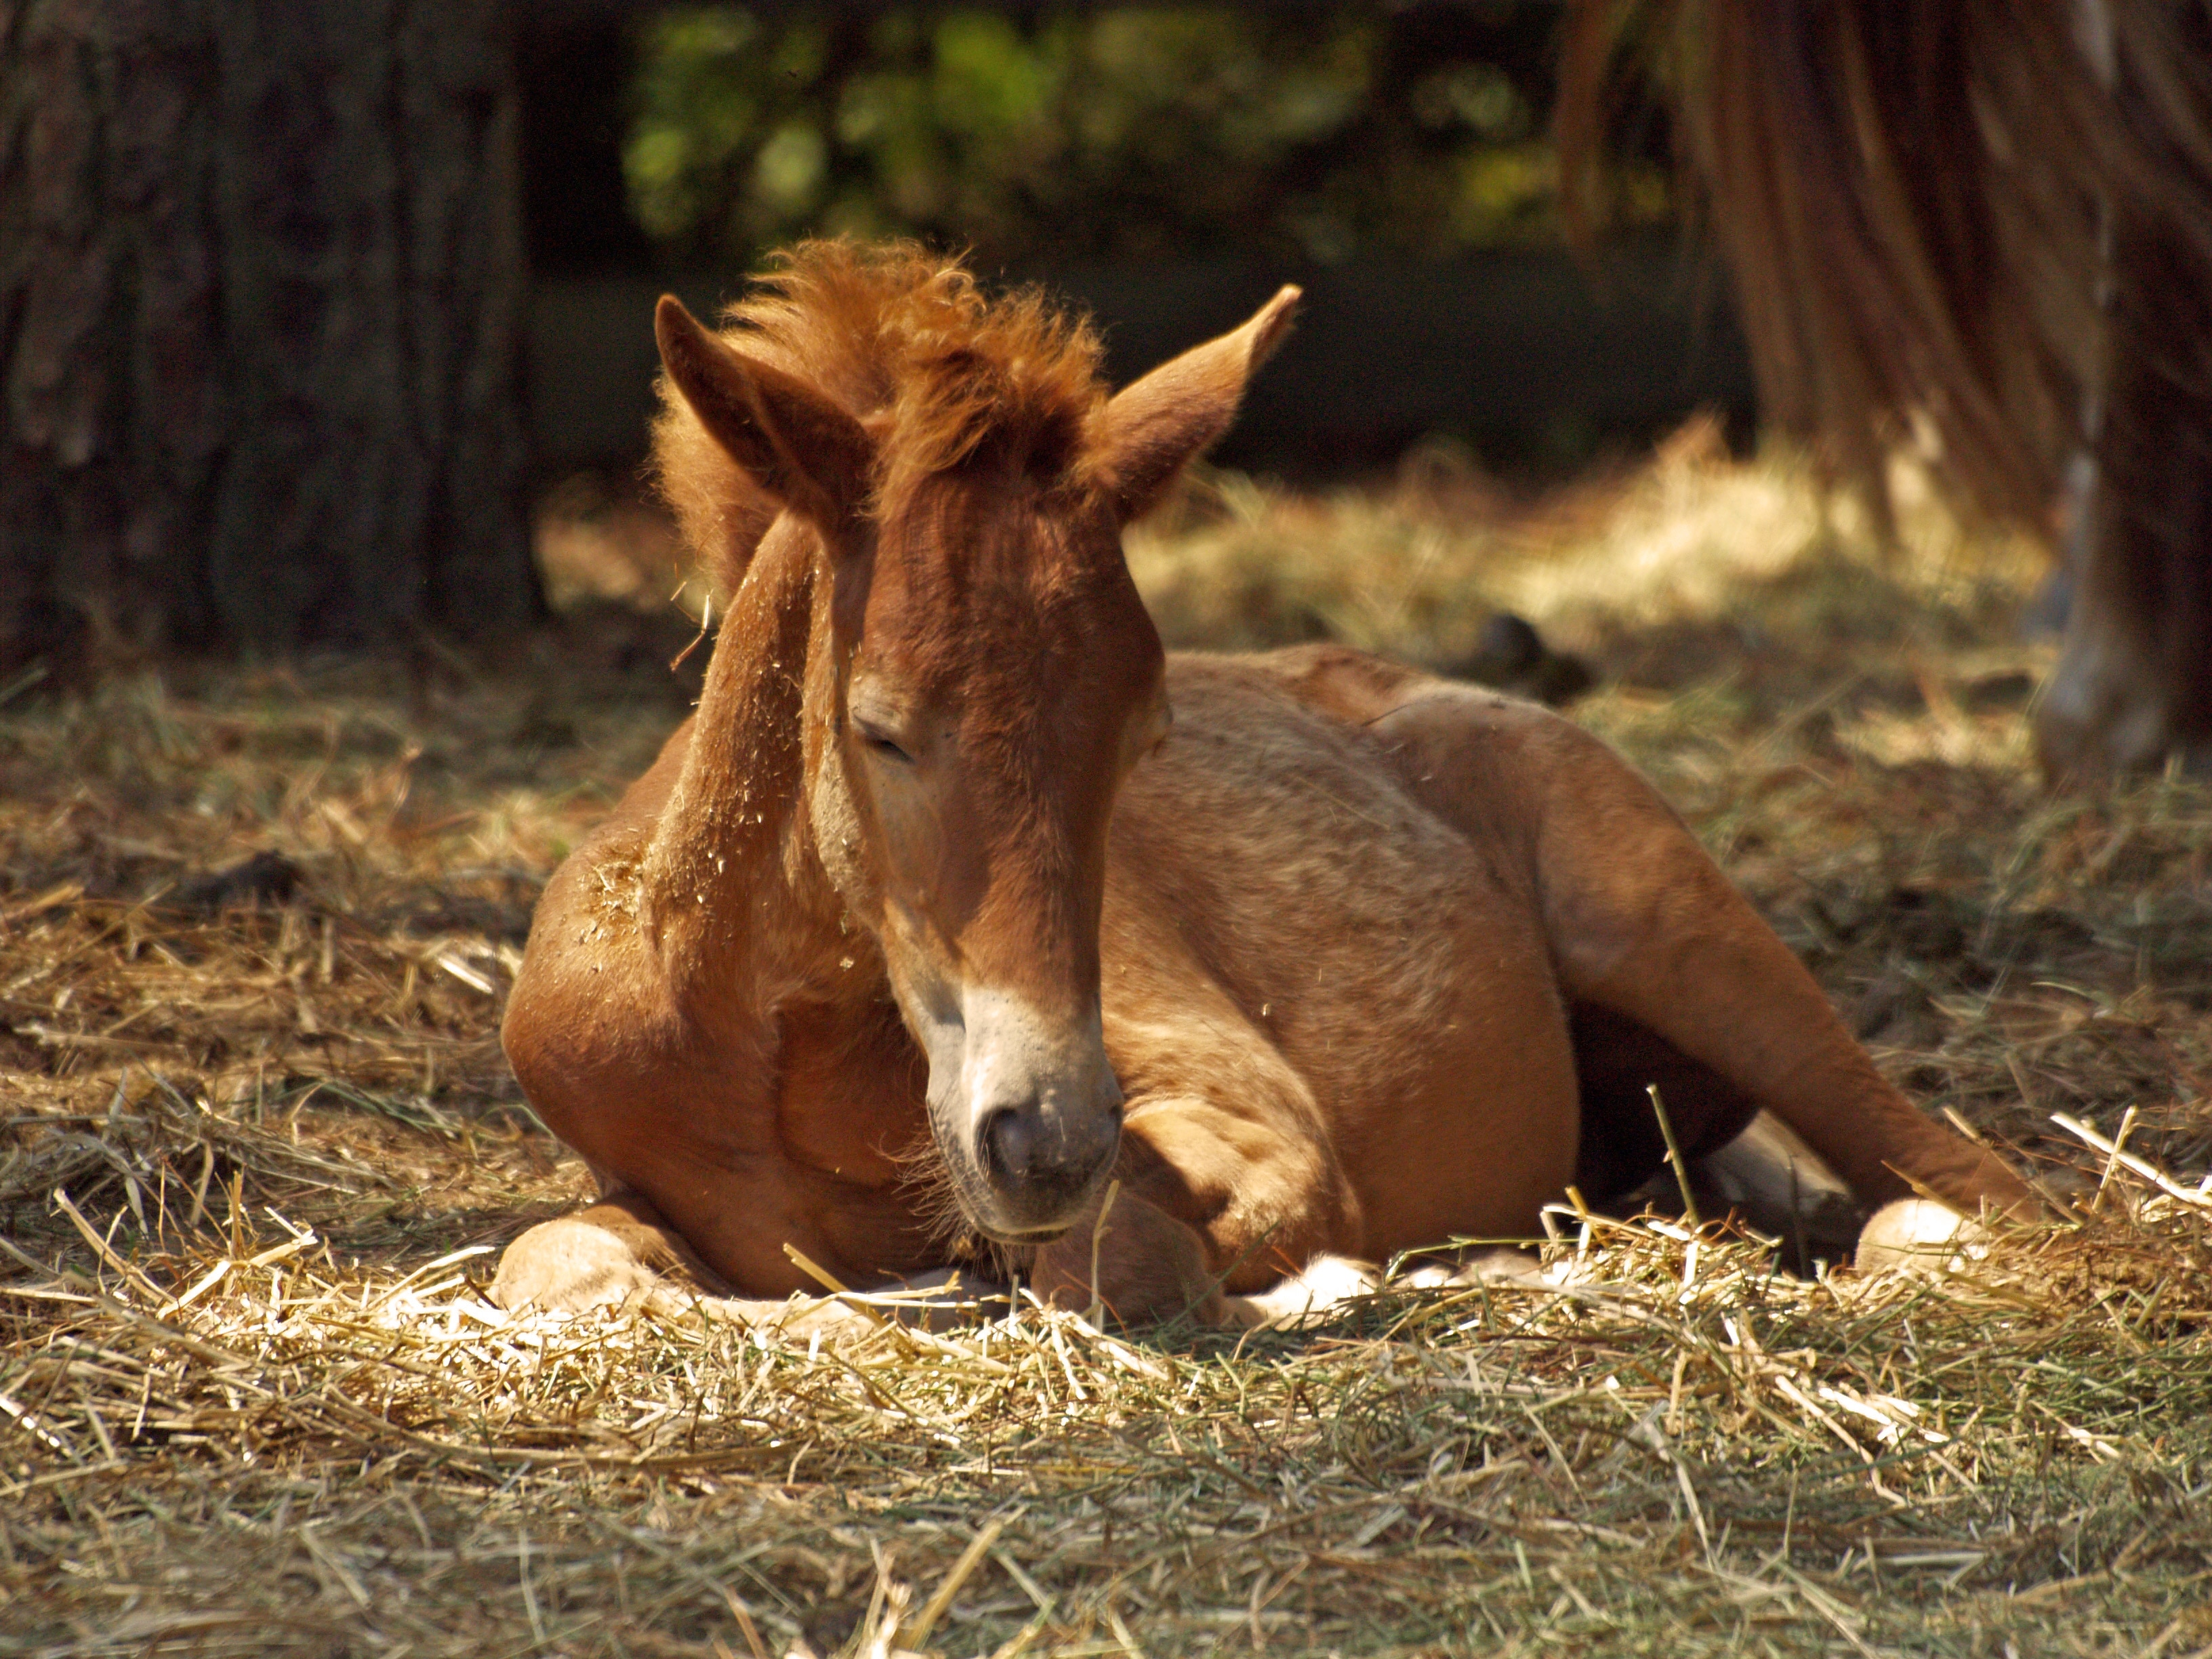 brown horse lying on green dried grass during daytime